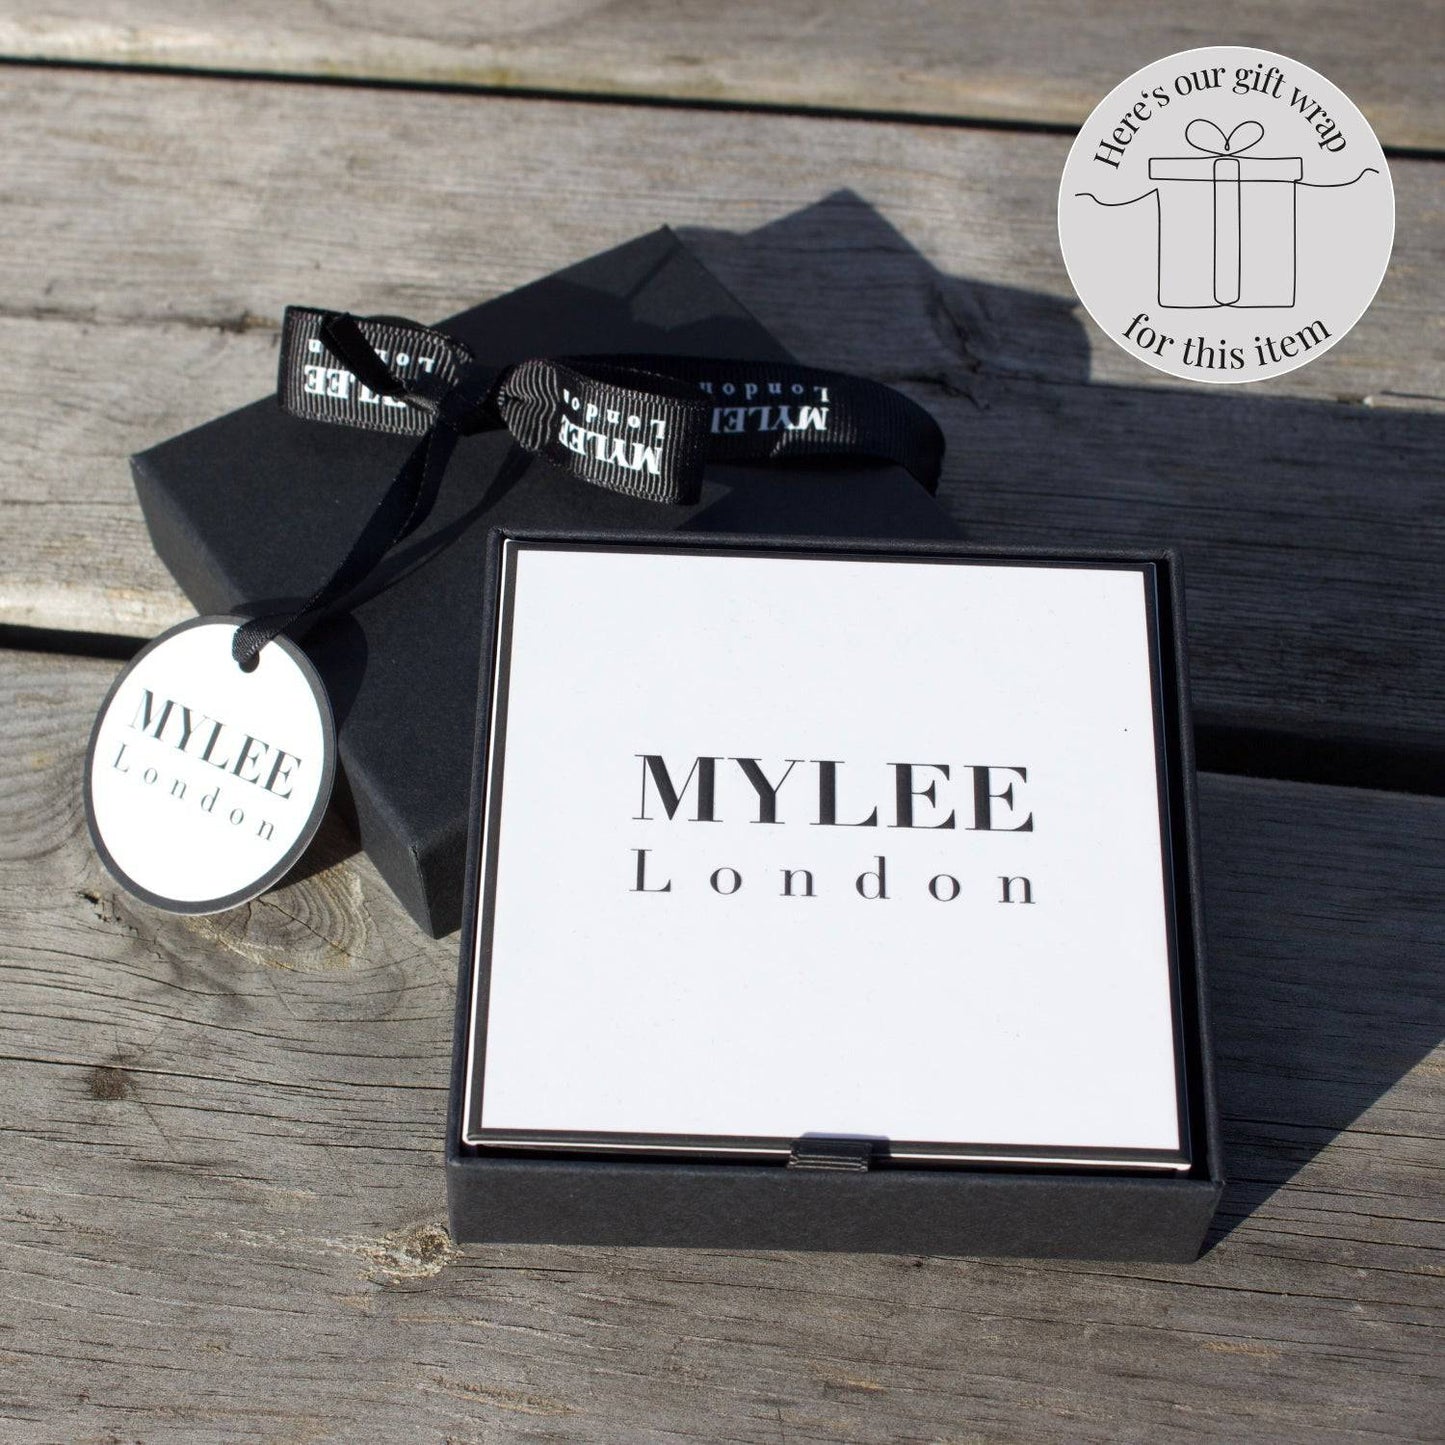 Long Haired Guinea Pig Silver Charm - MYLEE London